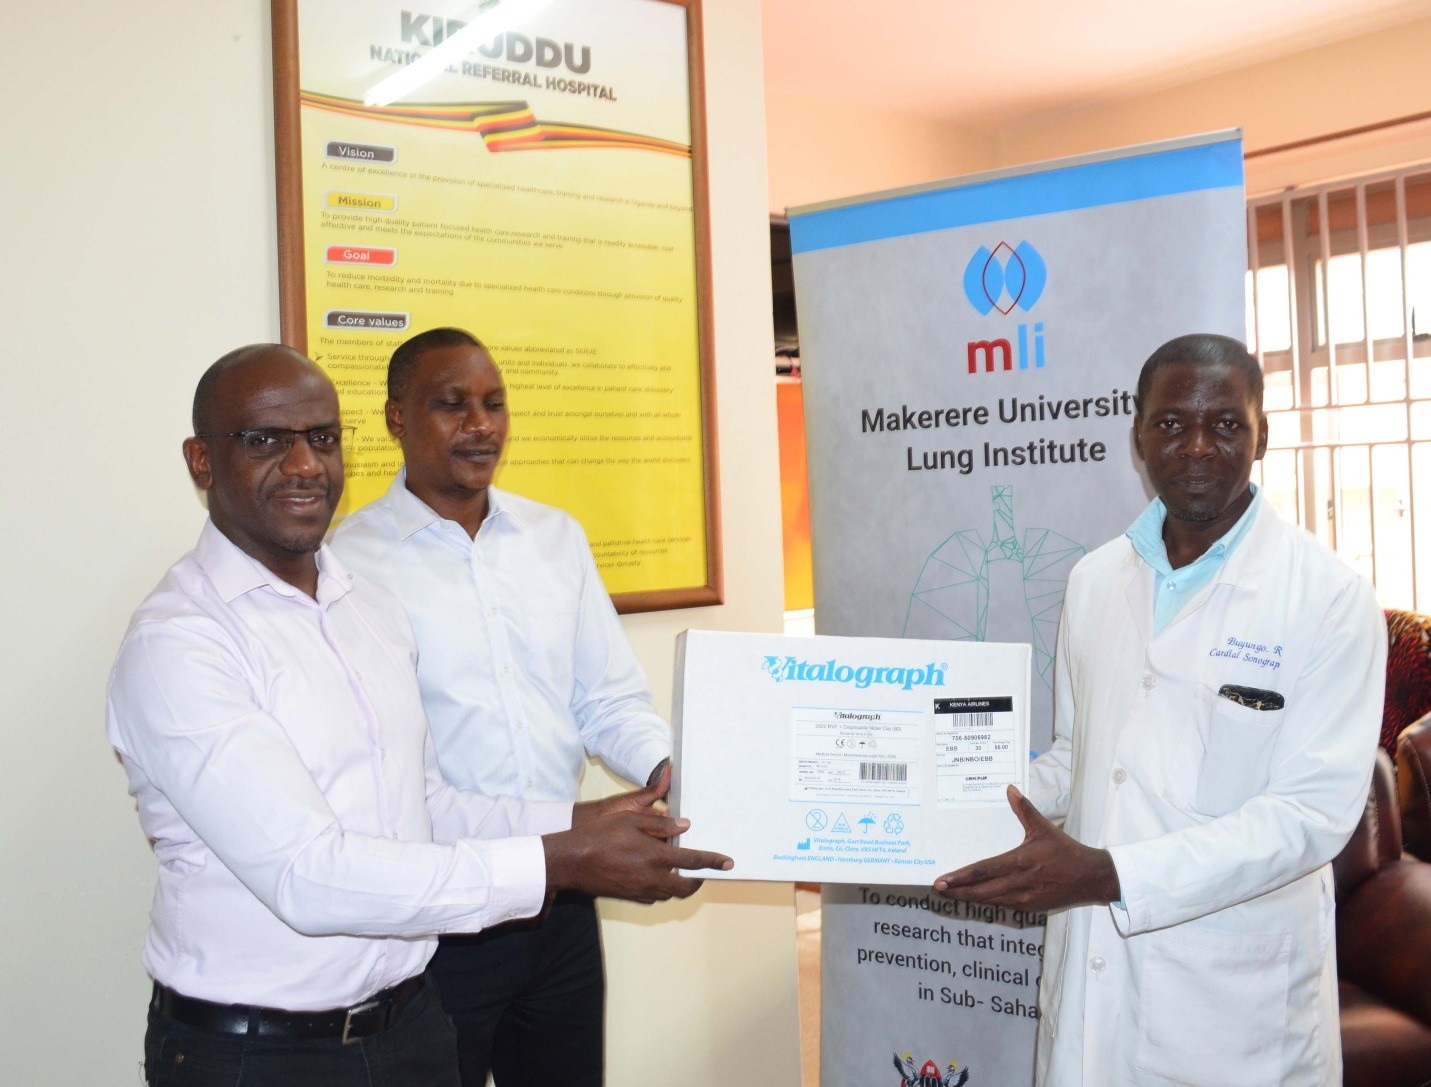 From the right, Simon Mugambe Head of Operations Makerere University Lung Institute, Dr Ivan Kimuli head Clinical Services Makerere University Lung Institute hand over a mouth pieces for the Vitalograph Machine to Robert Buyungo the Spirometry technician at Kiruddu National Referal Hospital on 27th February 2024